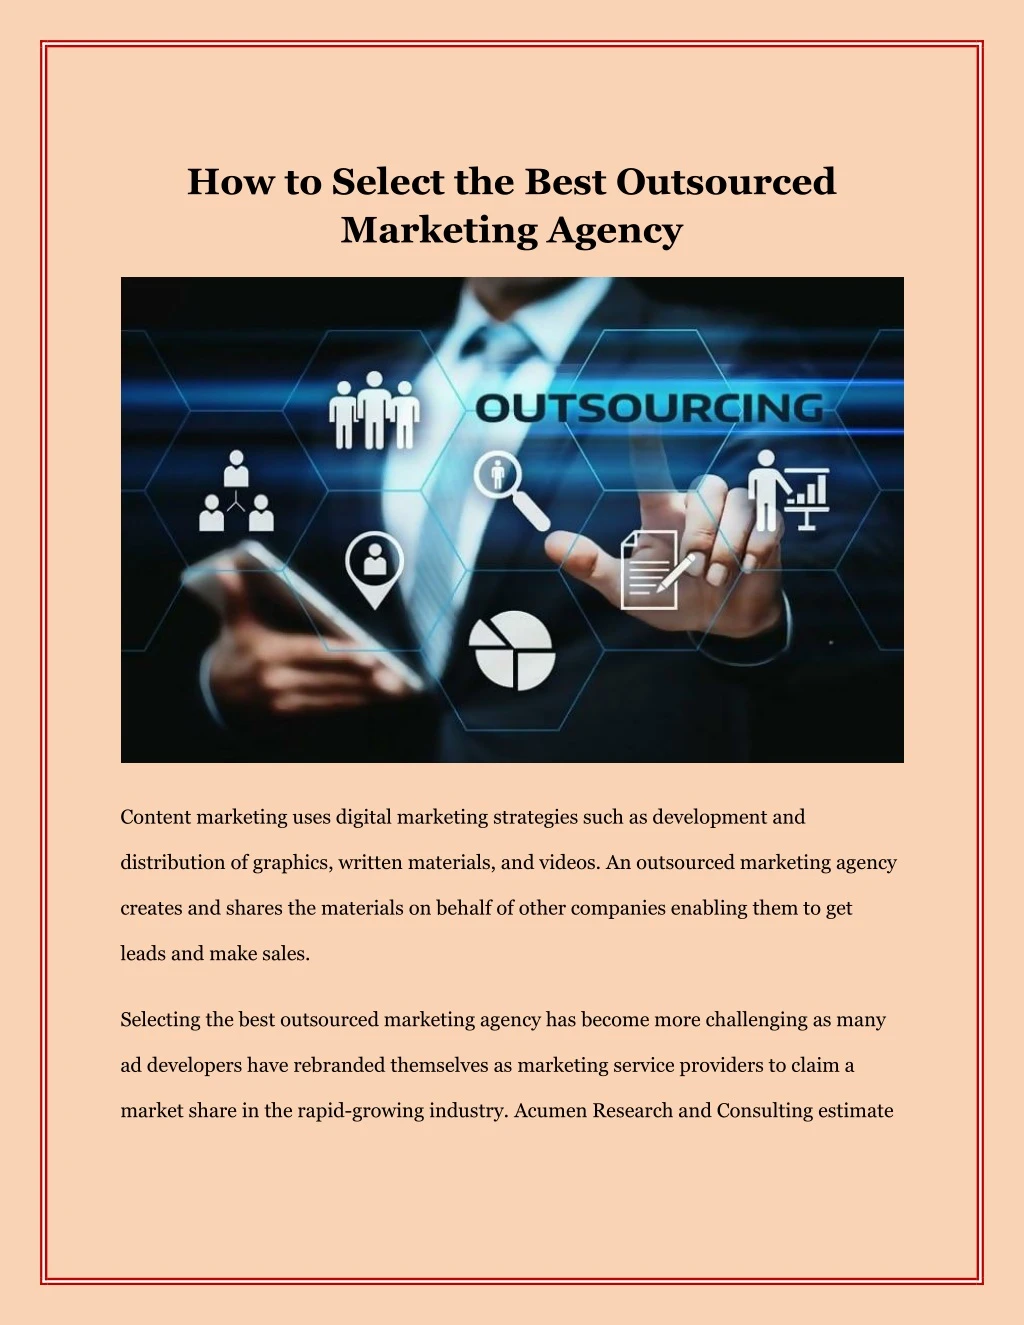 how to select the best outsourced marketing agency